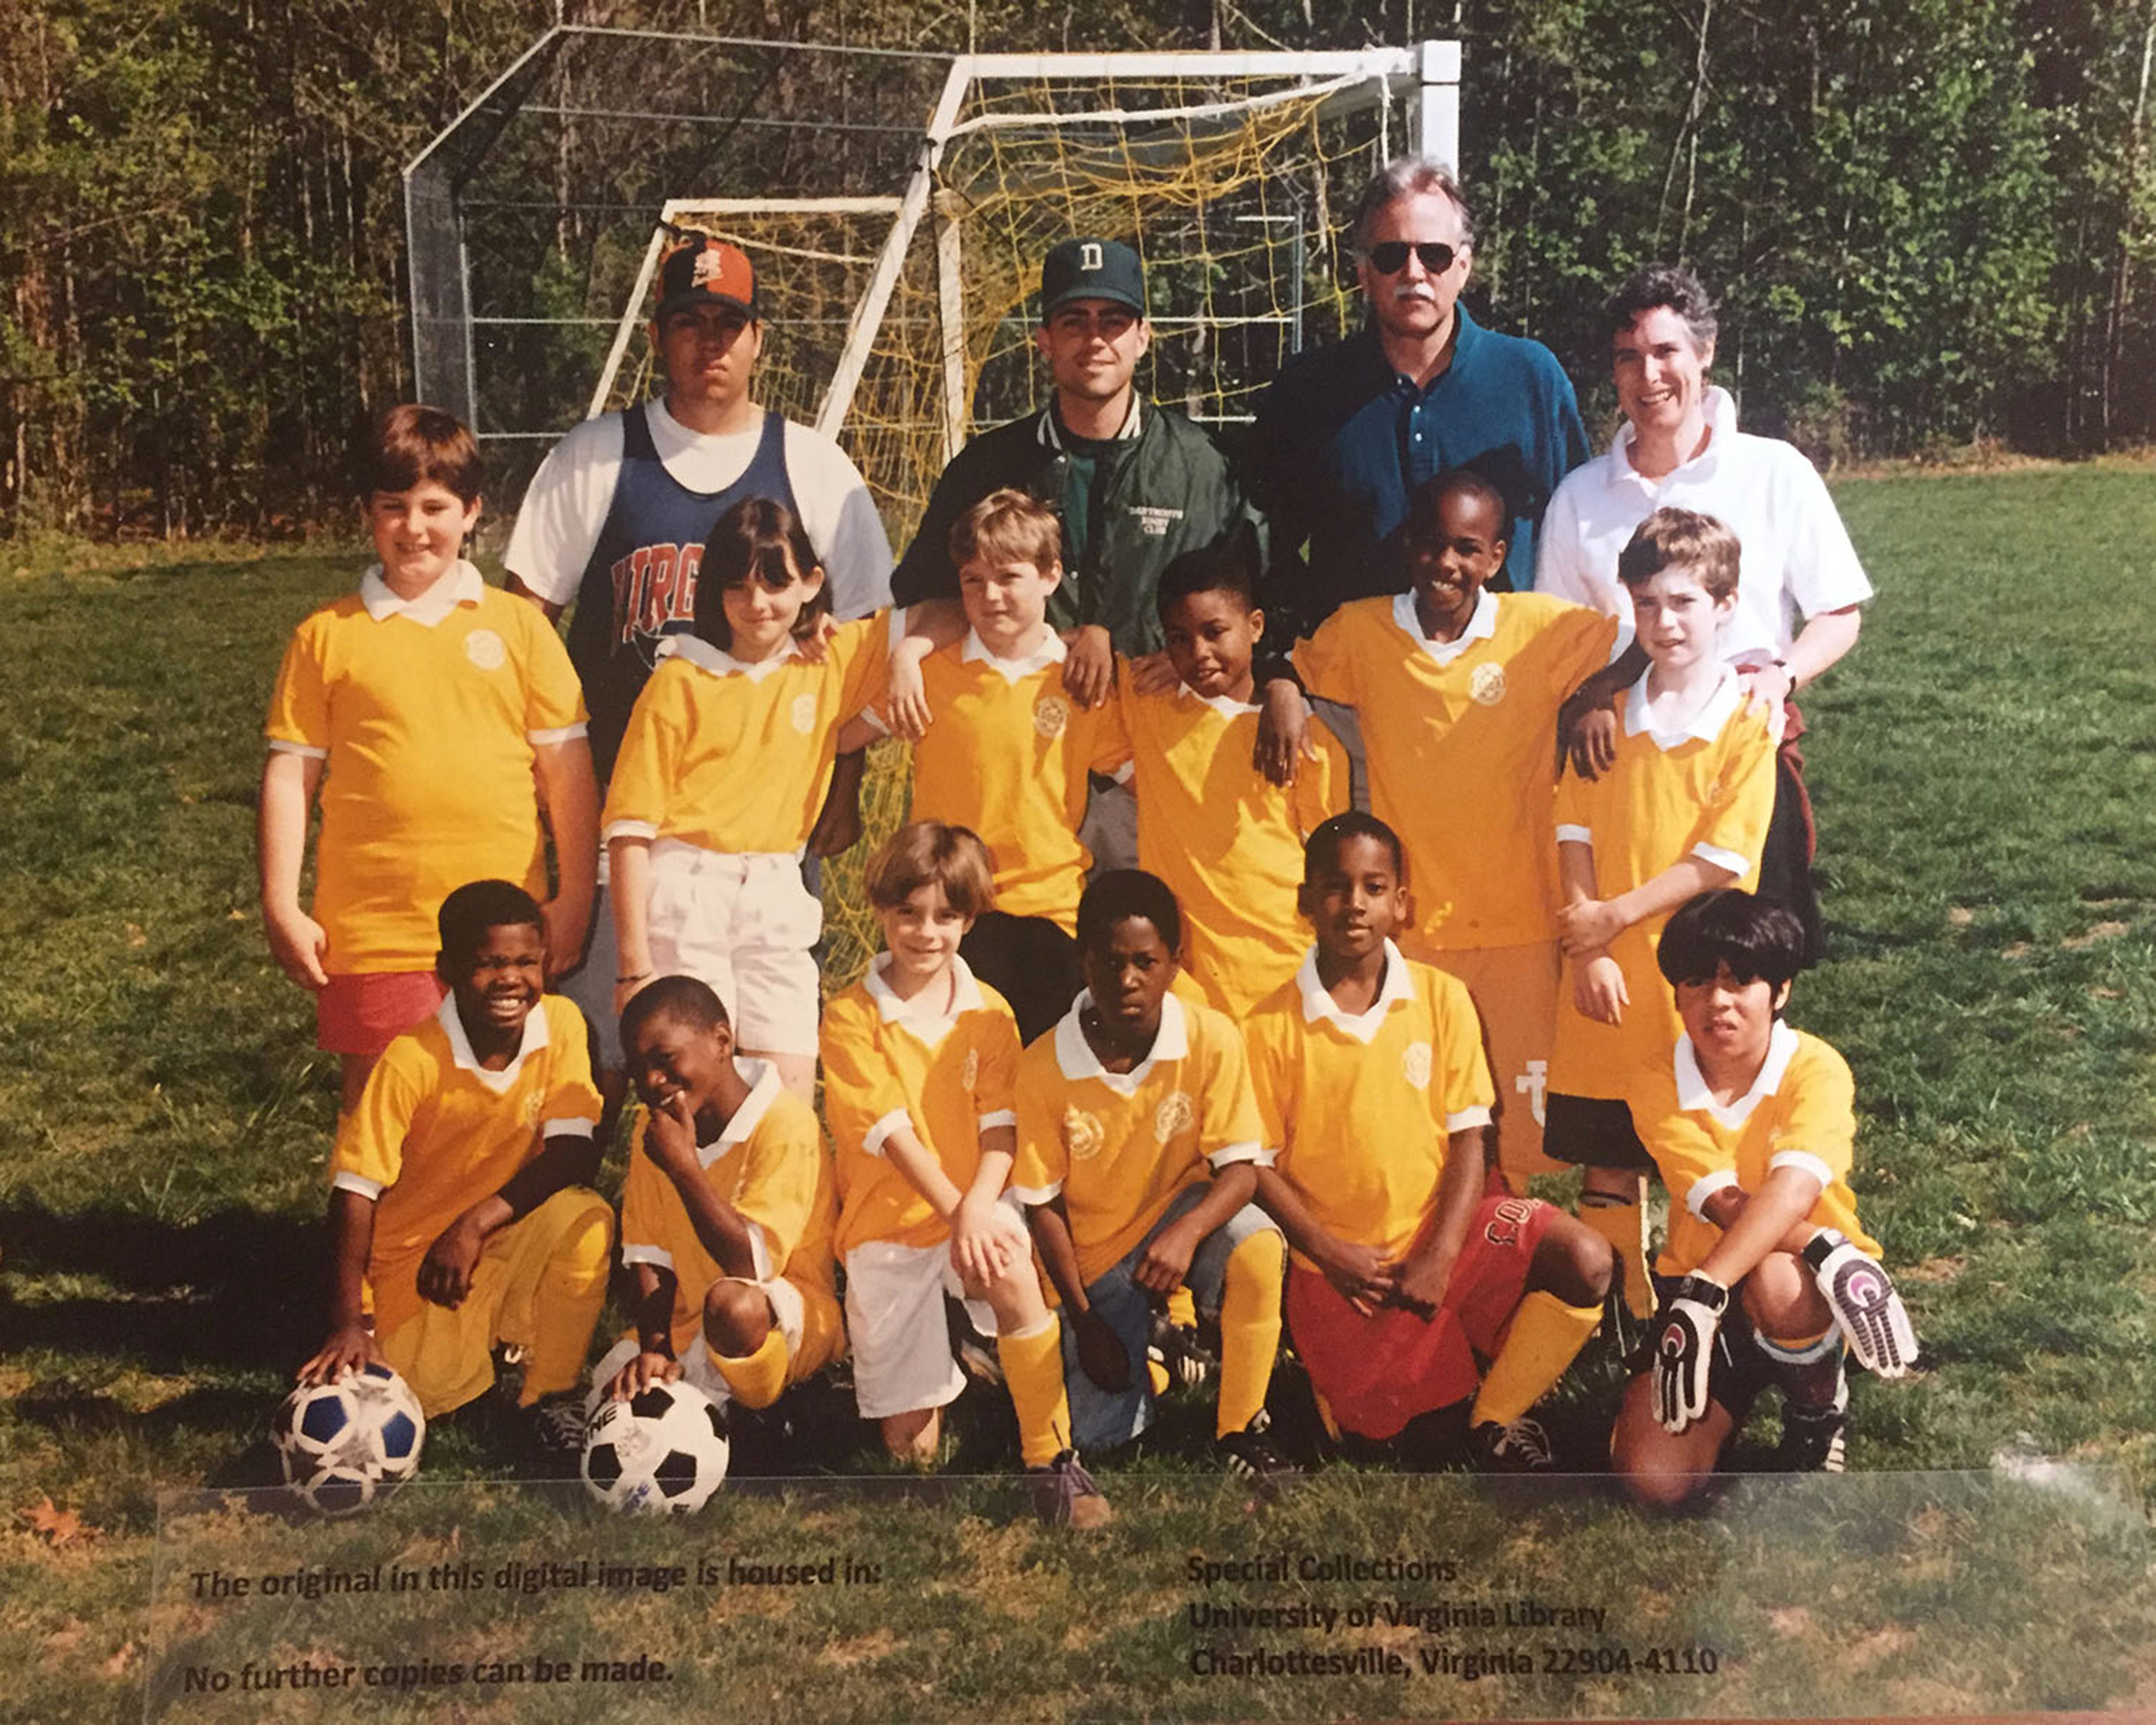 A photo of a youth soccer team from the 1990s. Wearing yellow jerseys, the team is arranged in two rows. The kids in the back stand and the kids in the front kneel. Four adult coaches stand behind the kids.